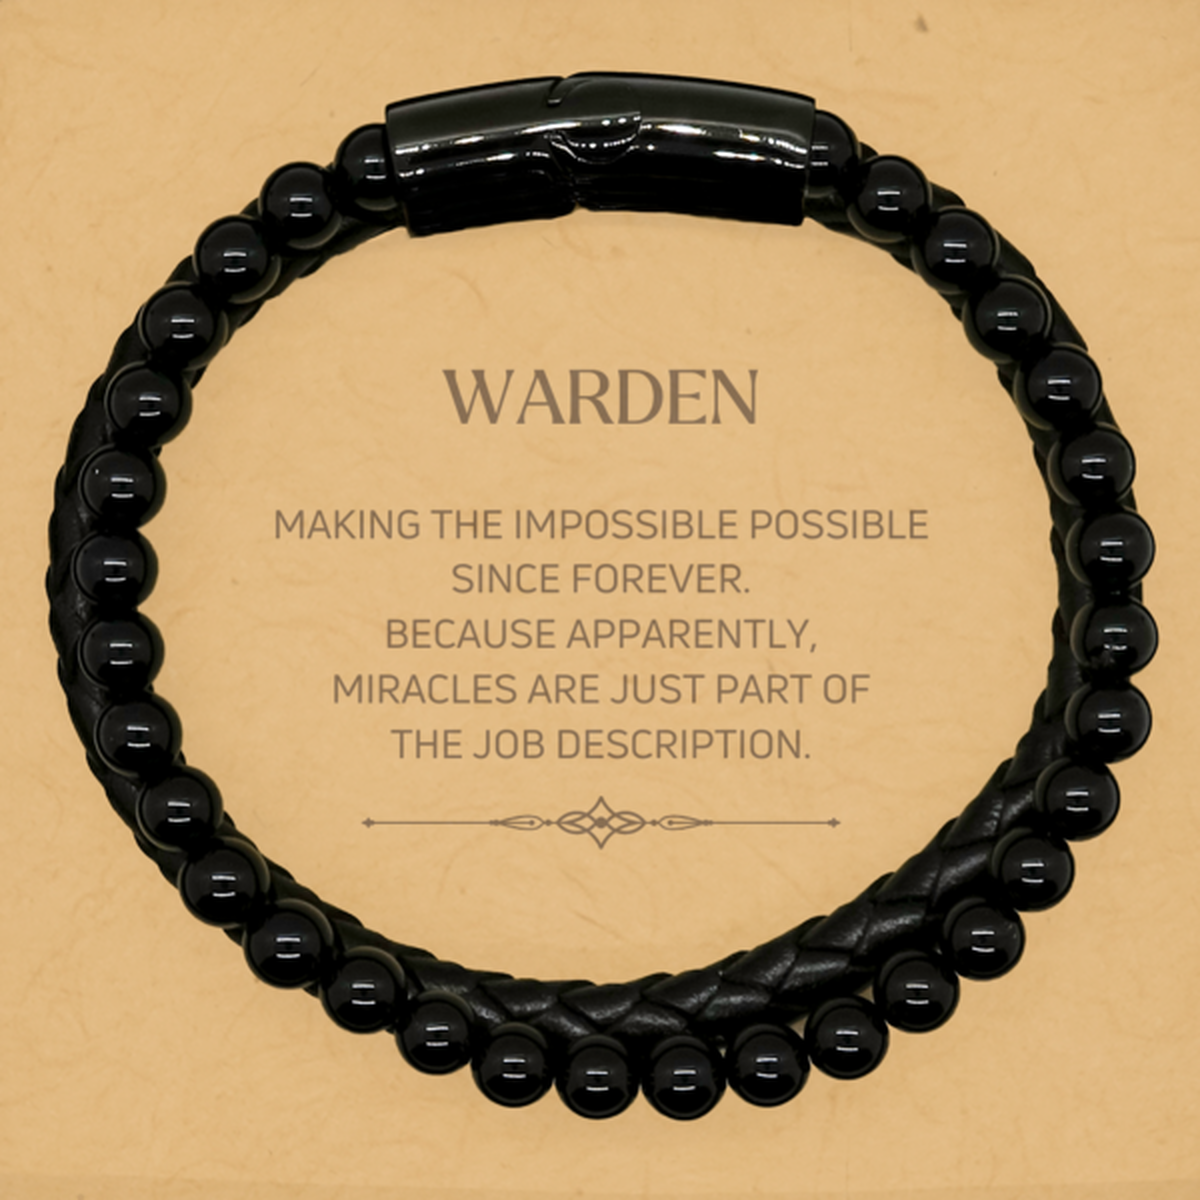 Funny Warden Gifts, Miracles are just part of the job description, Inspirational Birthday Stone Leather Bracelets For Warden, Men, Women, Coworkers, Friends, Boss